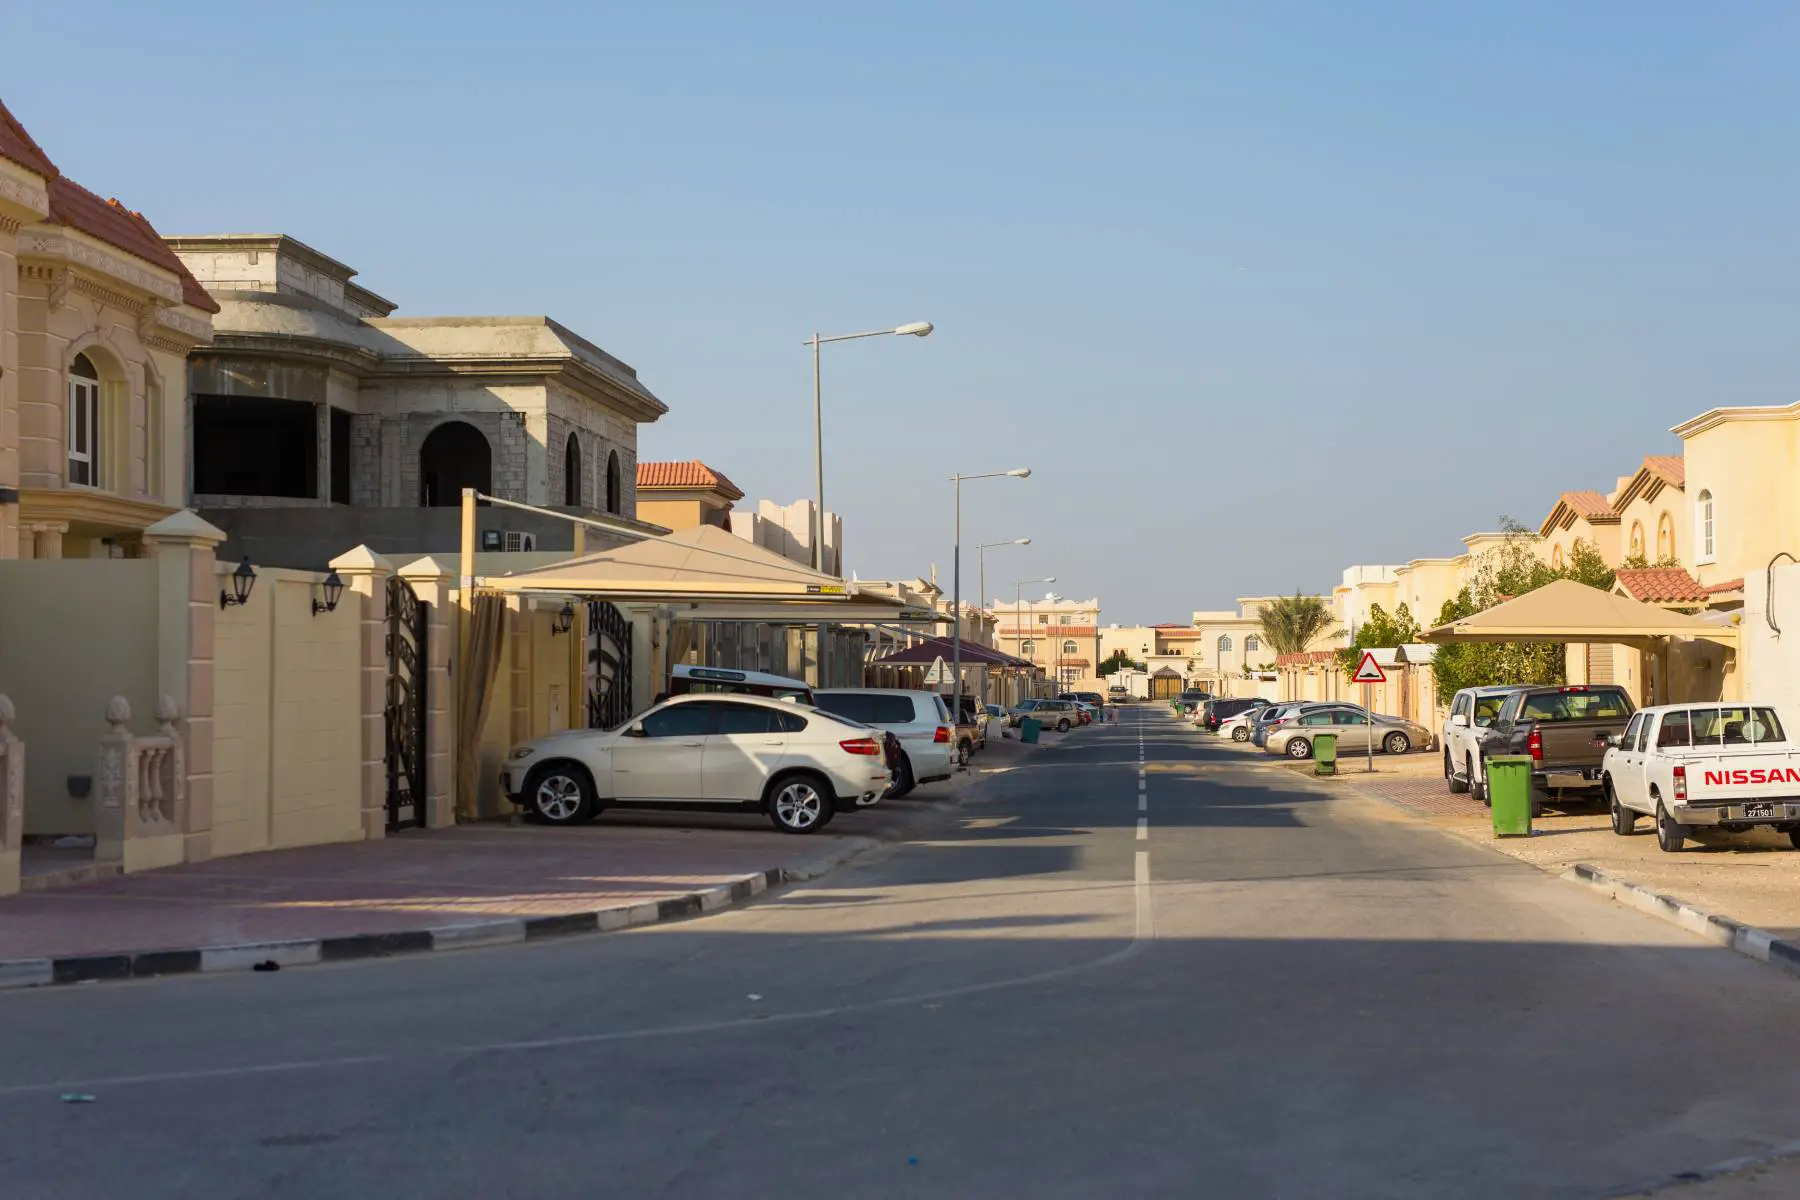 Cars and trash cans outside homes on Al Jebailat residential area in Doha, Qatar.